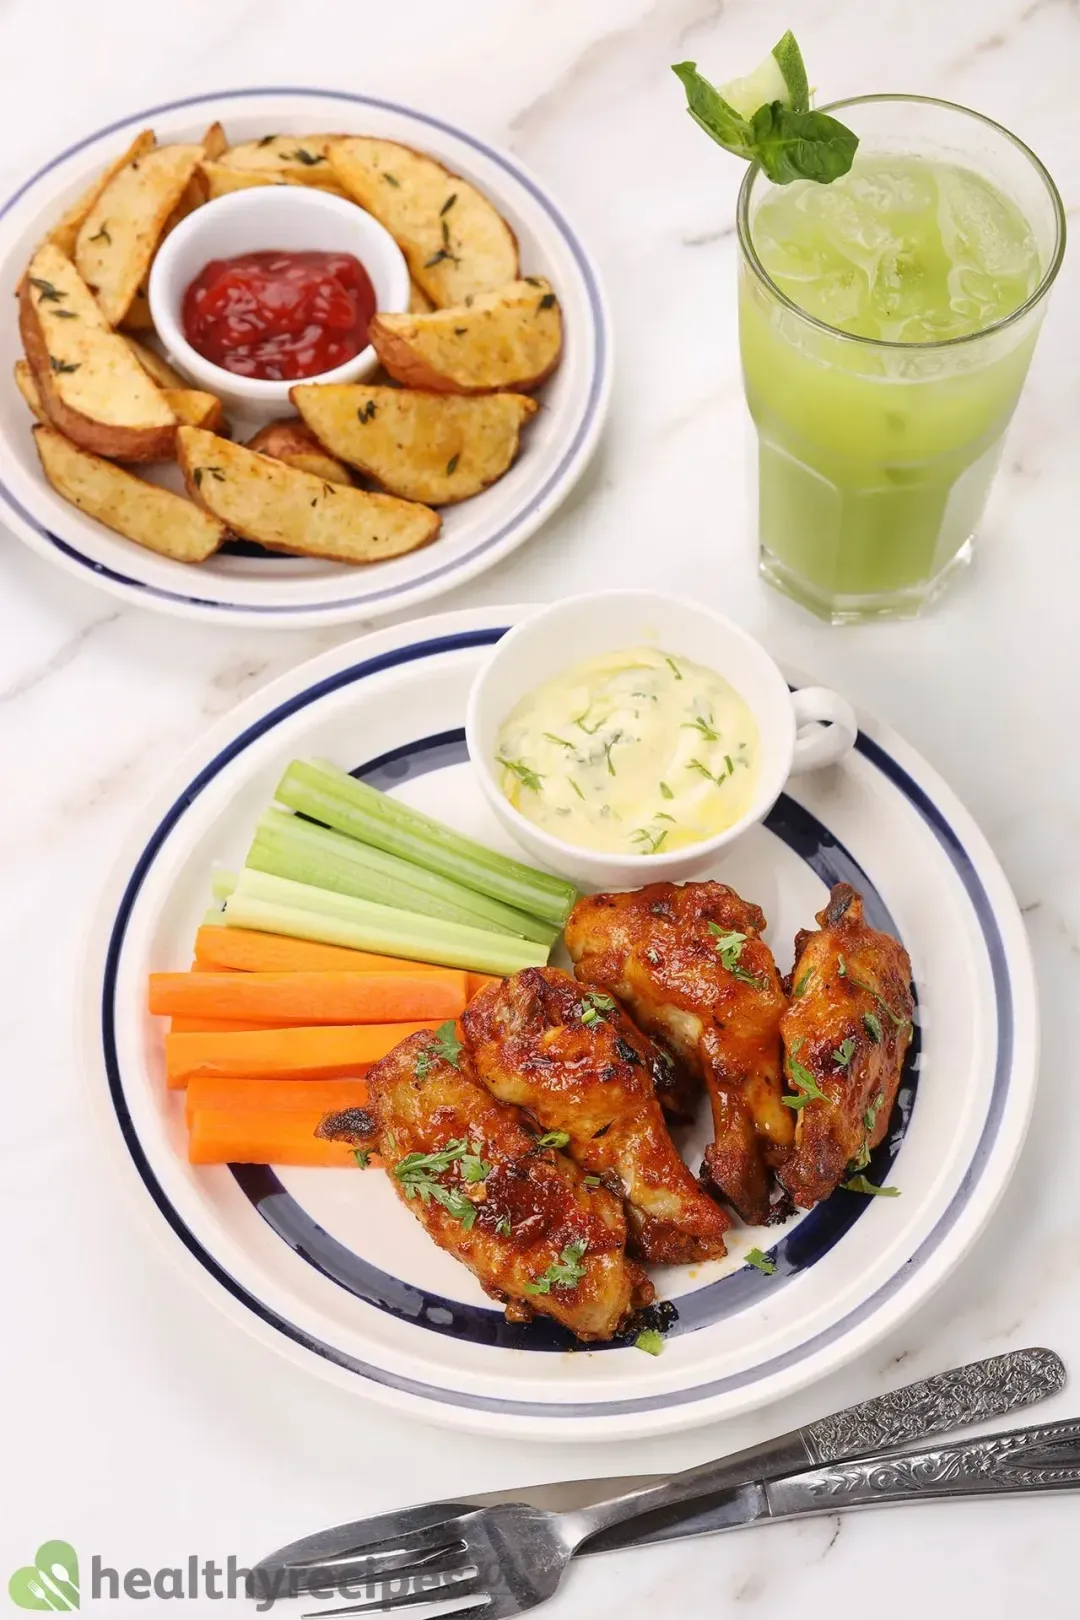 What to Serve With This Instant Pot Chicken Wings